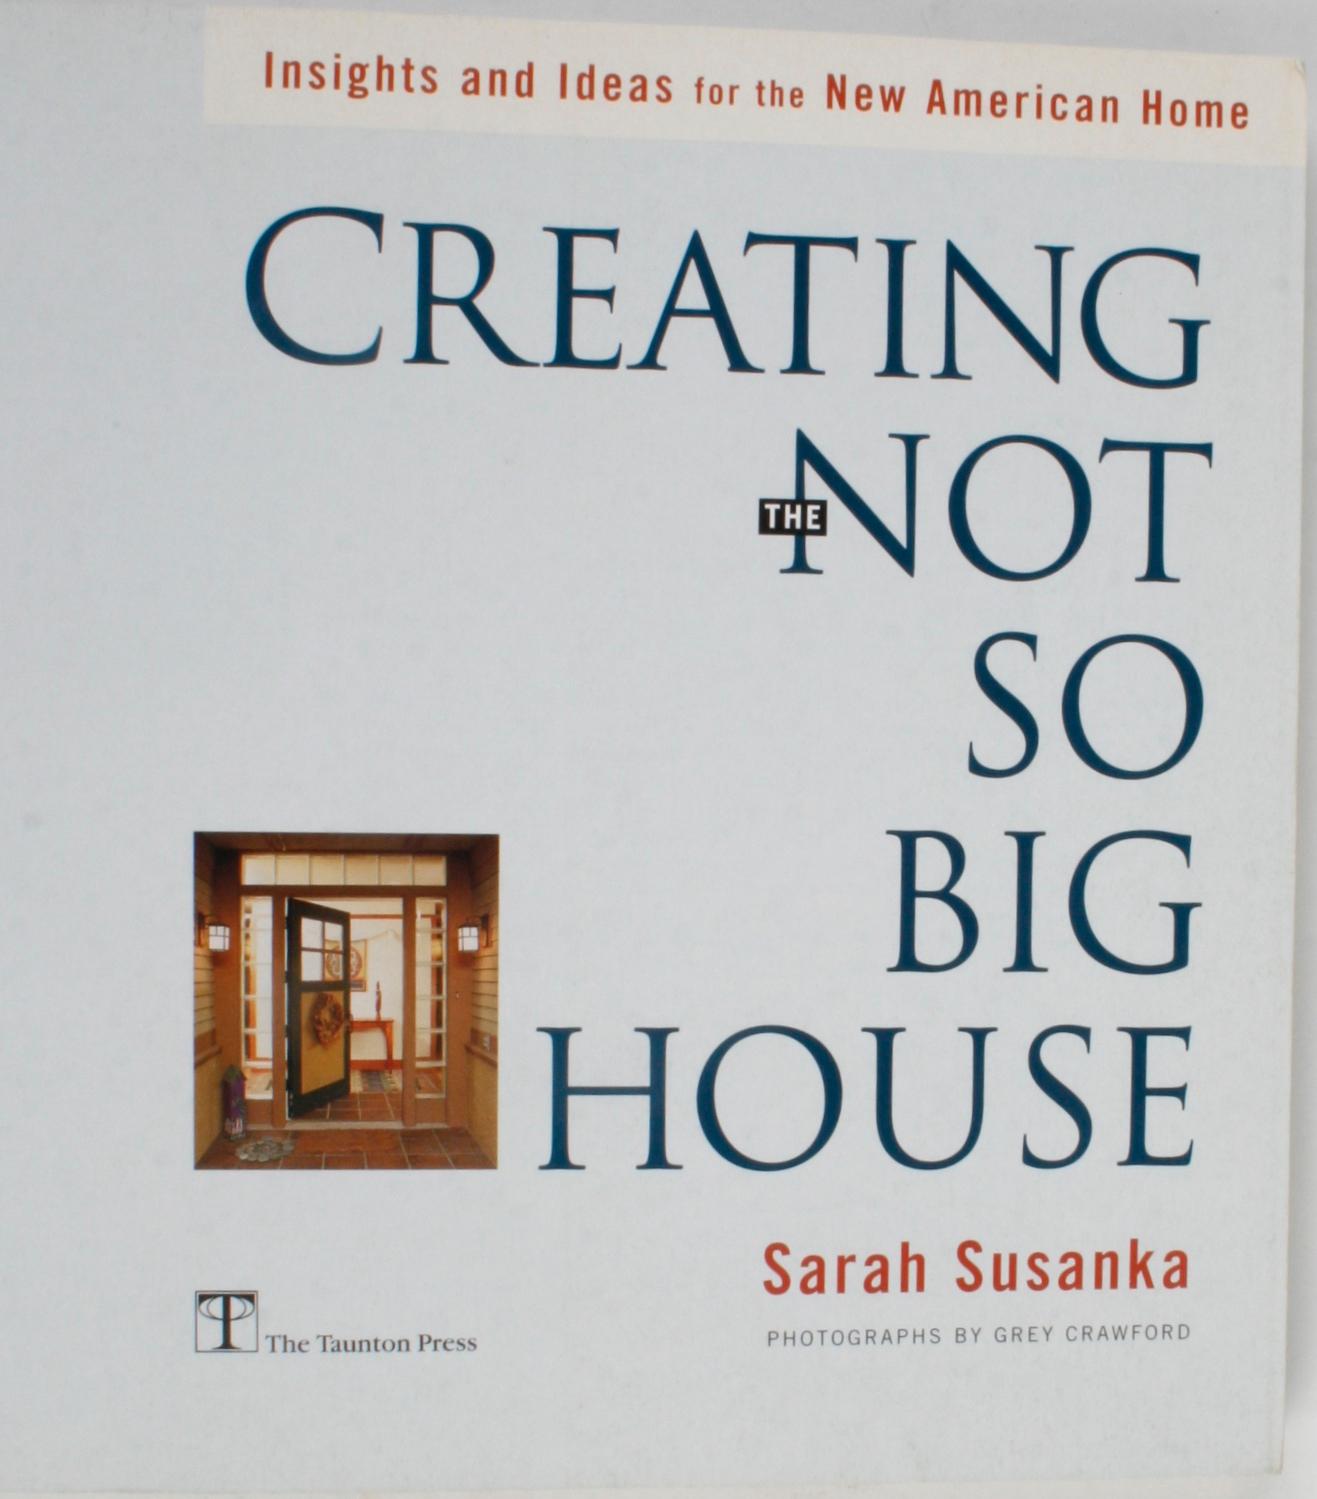 Creating The Not So Big House by Sarah Susanka. Newton: The Taunton Press, 2001. Softcover. 258 pp. A great how-to book on creating a smaller house that values quality over quantity, with an emphasis on comfort and beauty, a high level of detail,